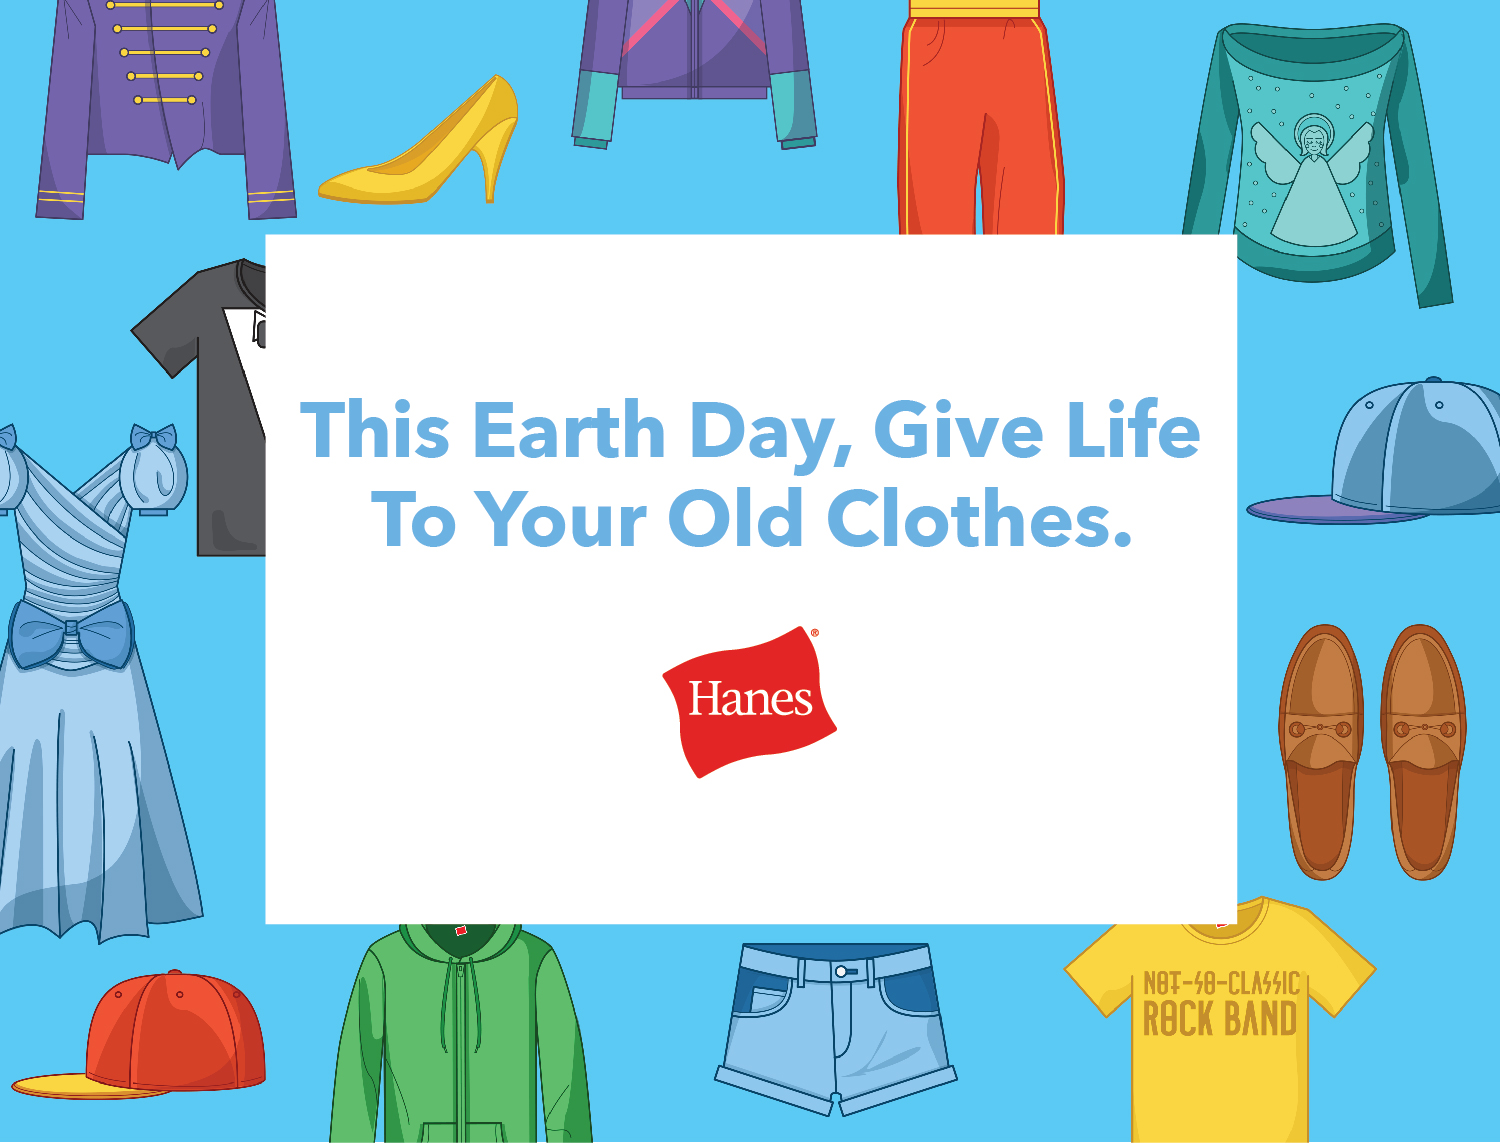 Give new life to your old clothes through this Earth Day project with Hanes and Give Back Box.